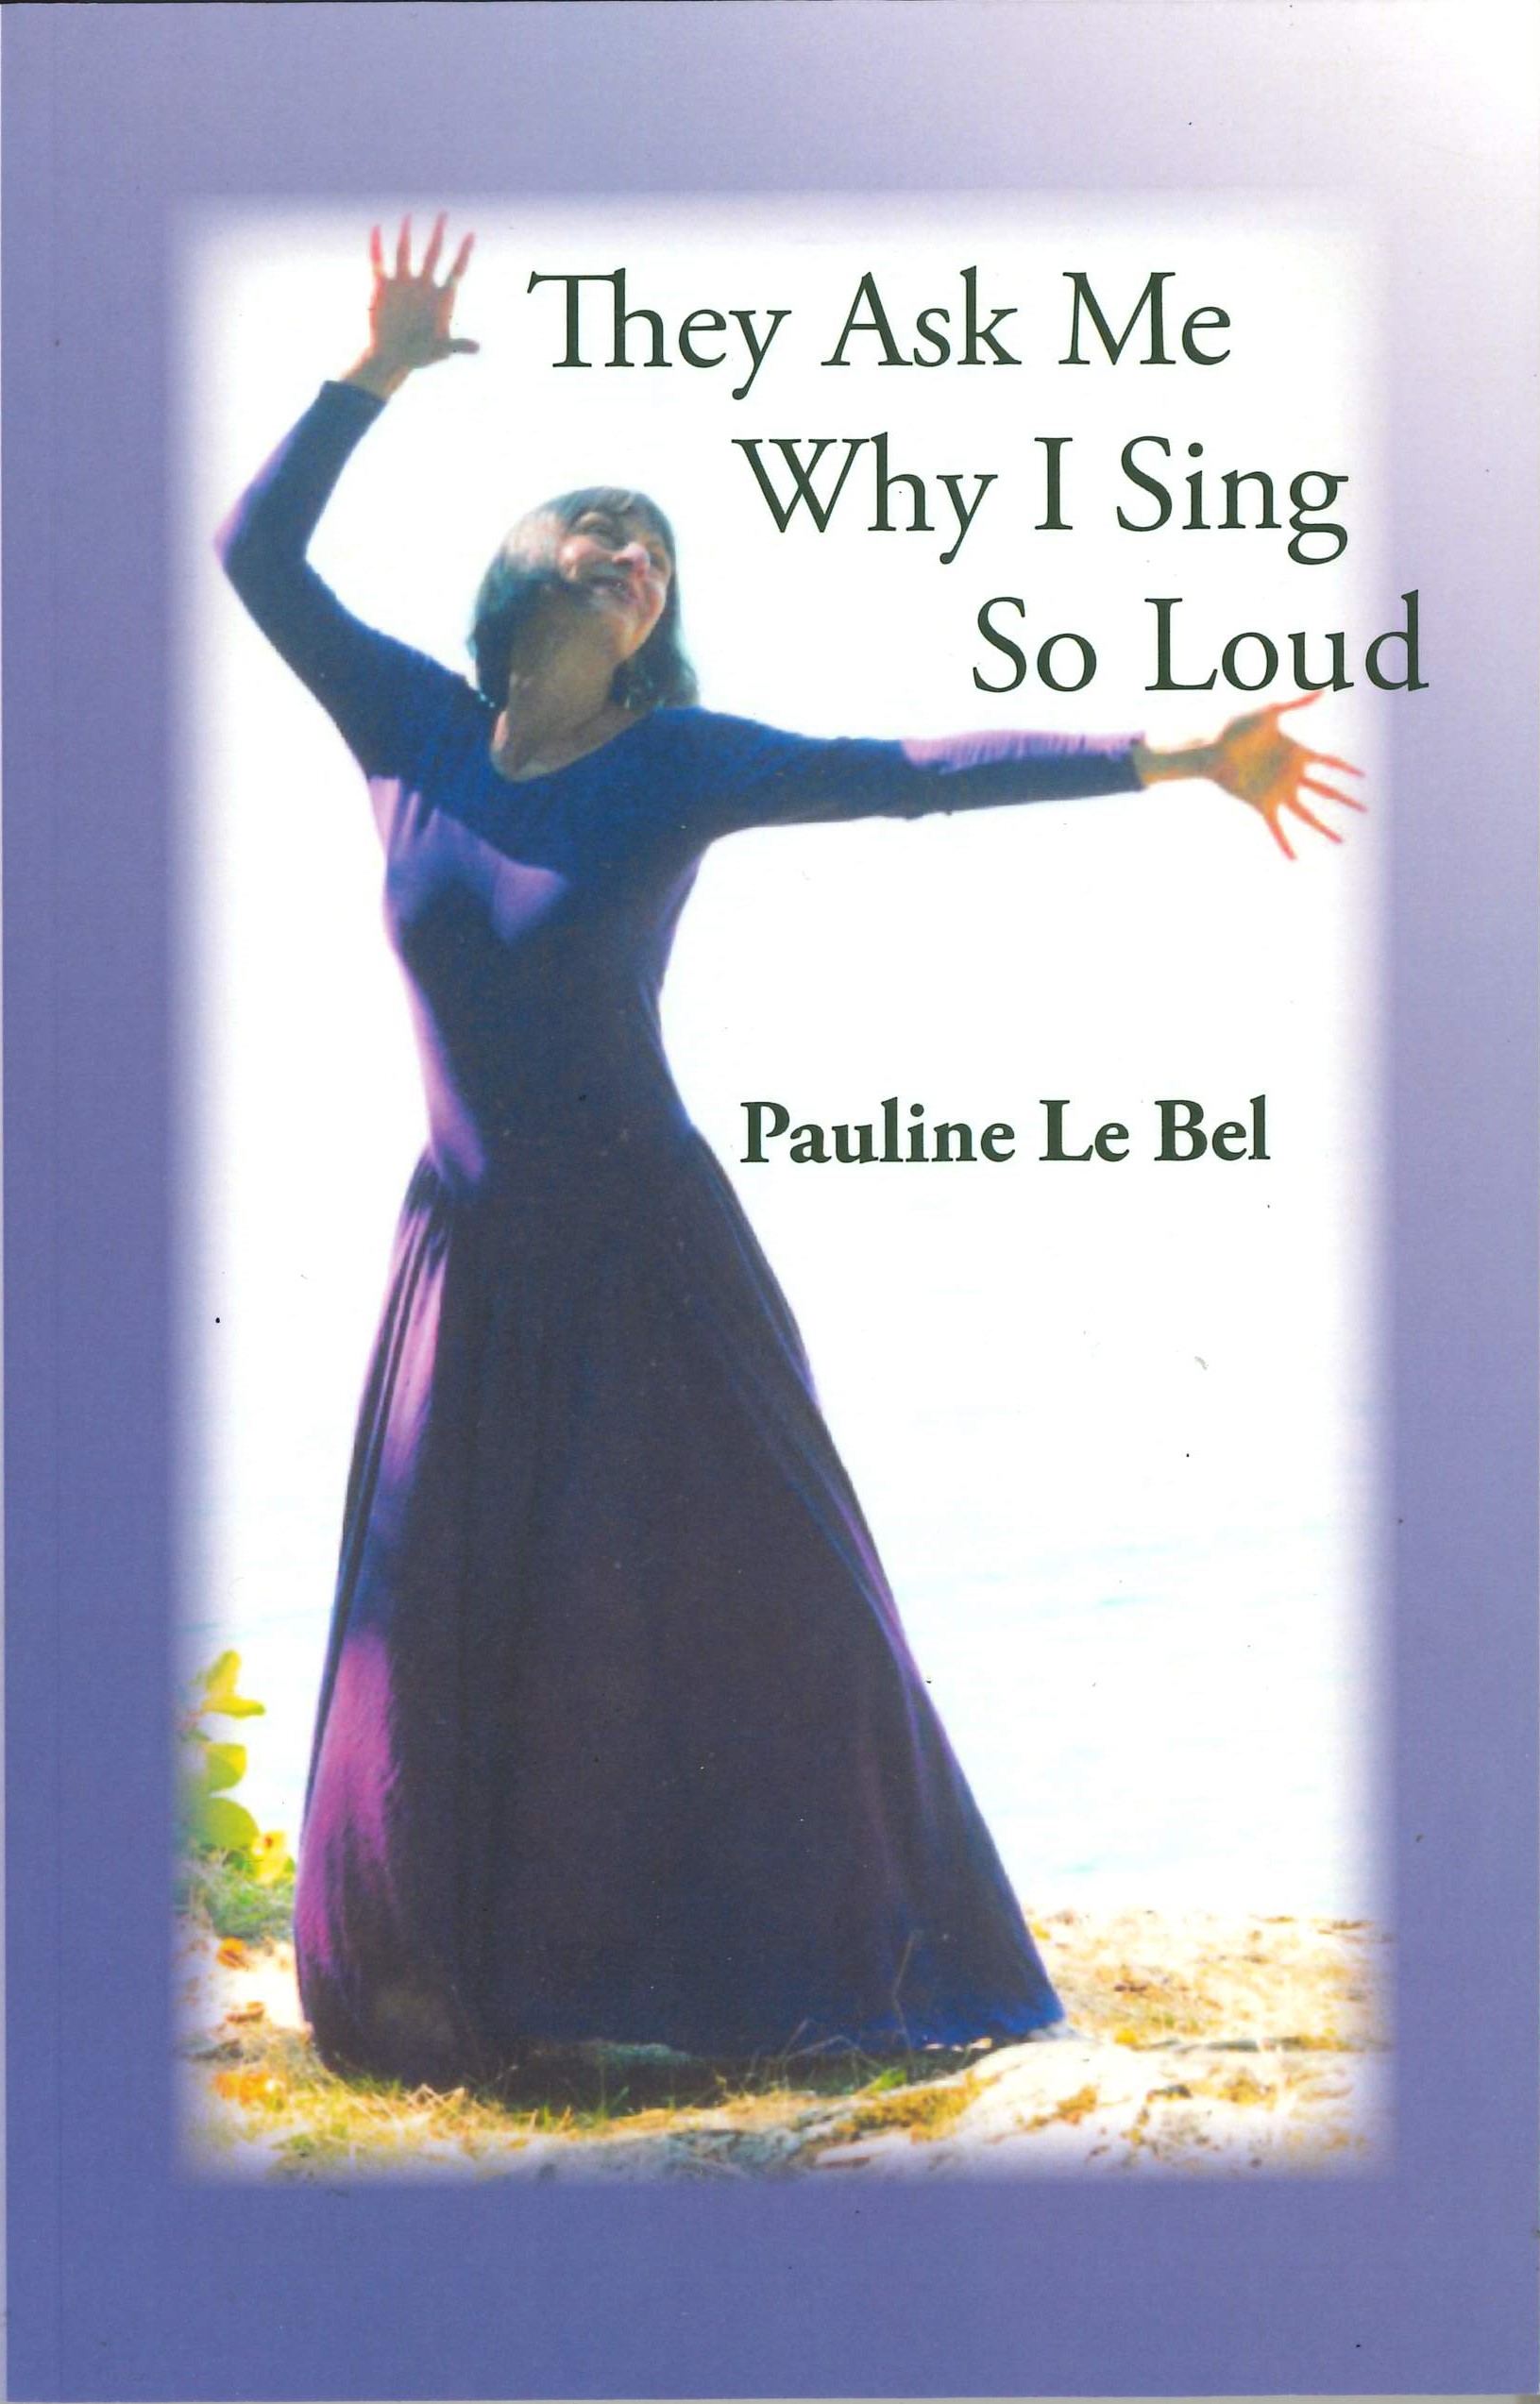 They Ask Me Why I Sing So Loud